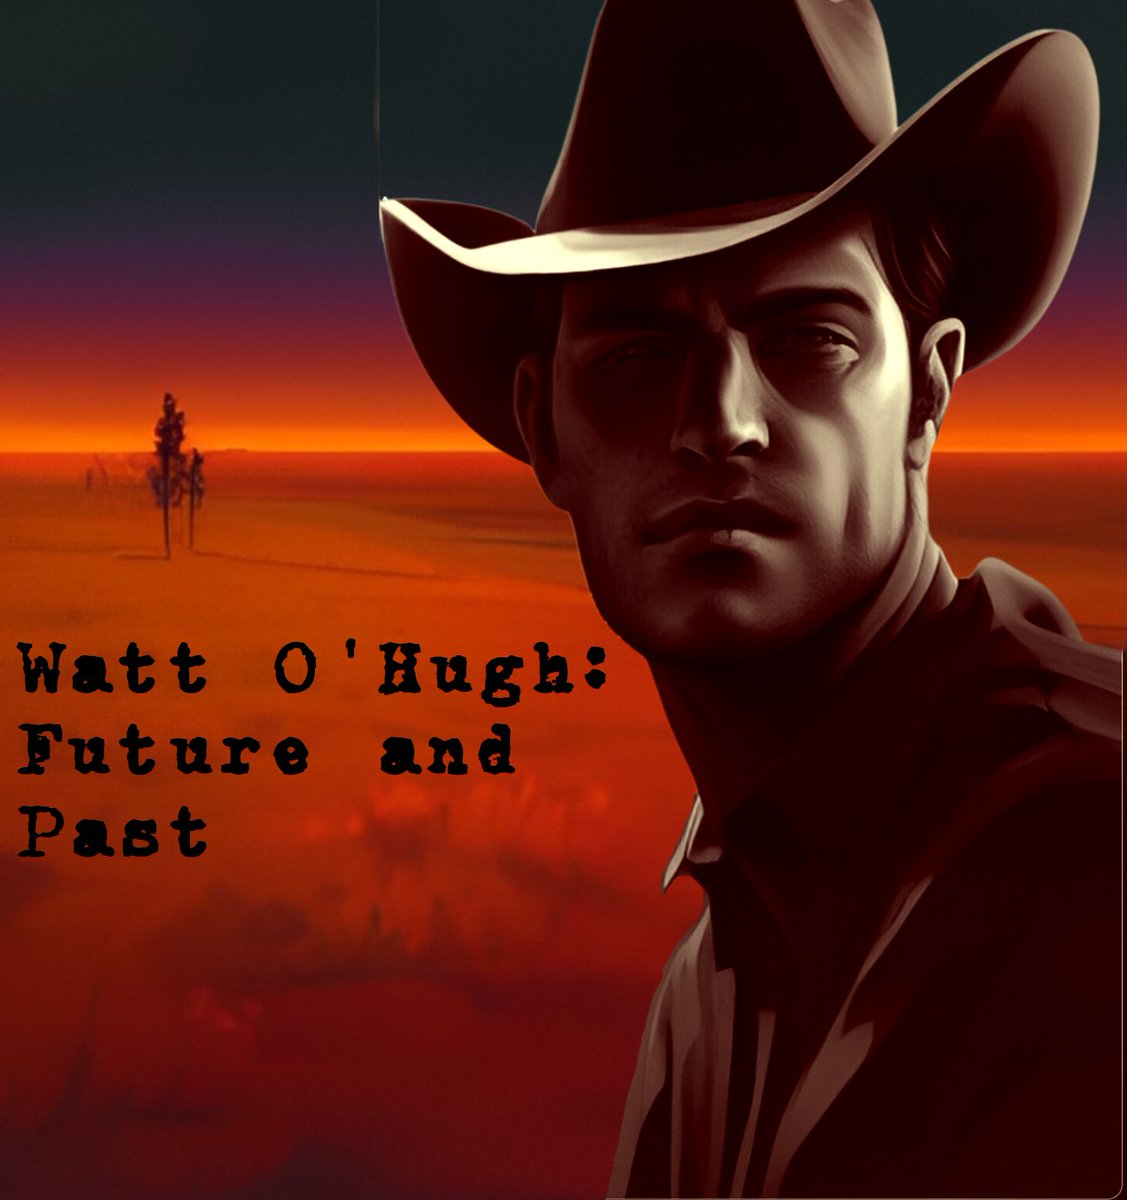 The season finale of the Watt O'Hugh radio drama drops tomorrow at 7 am, wherever you get your podcasts. #weirdwestern #western #sciencefiction